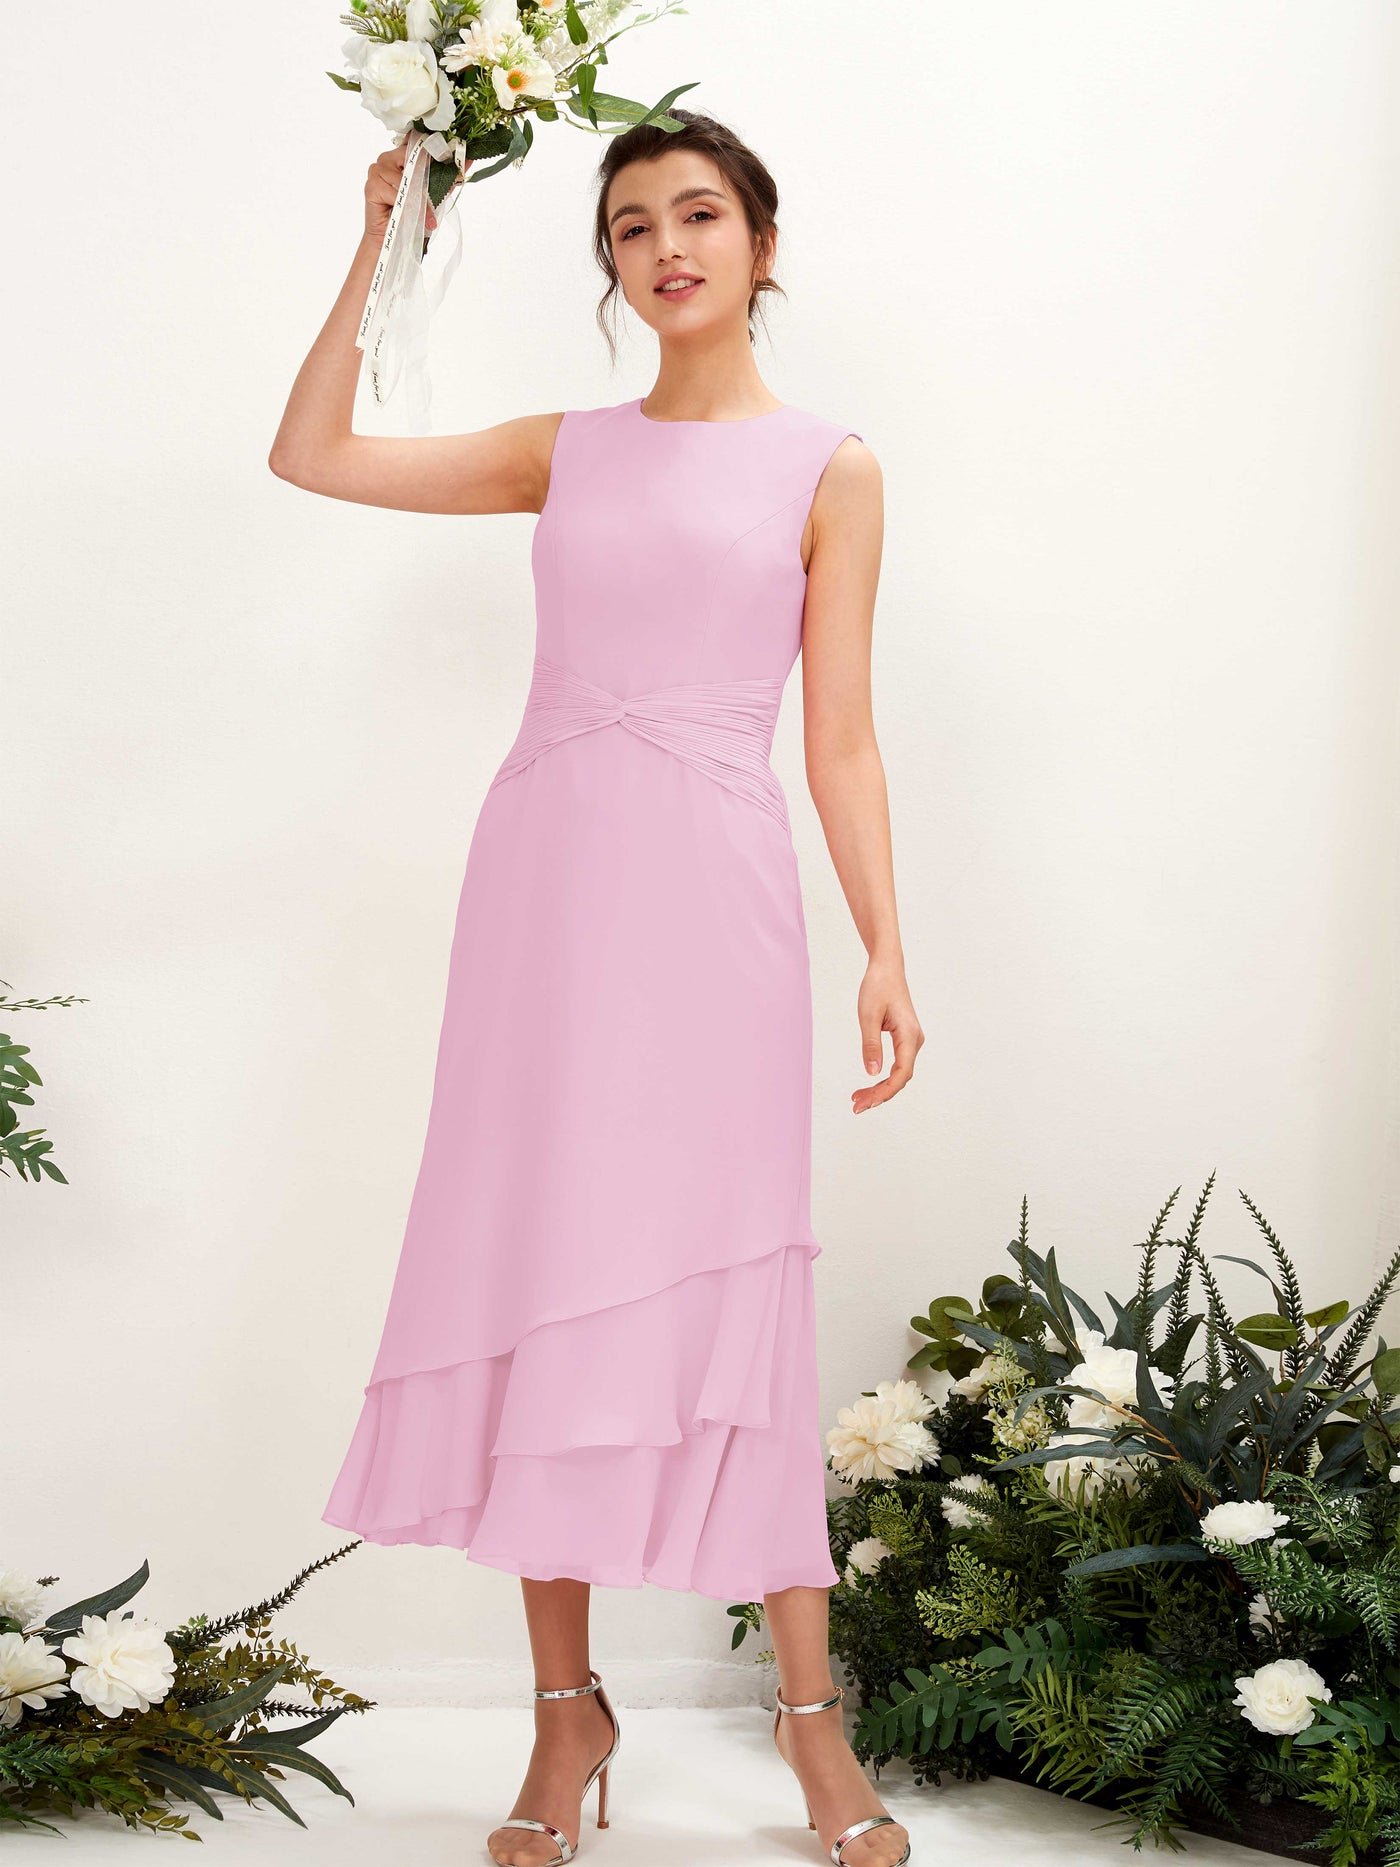 Mermaid/Trumpet Round Sleeveless Chiffon Bridesmaid Dress - Candy Pink (81221939)#color_candy-pink